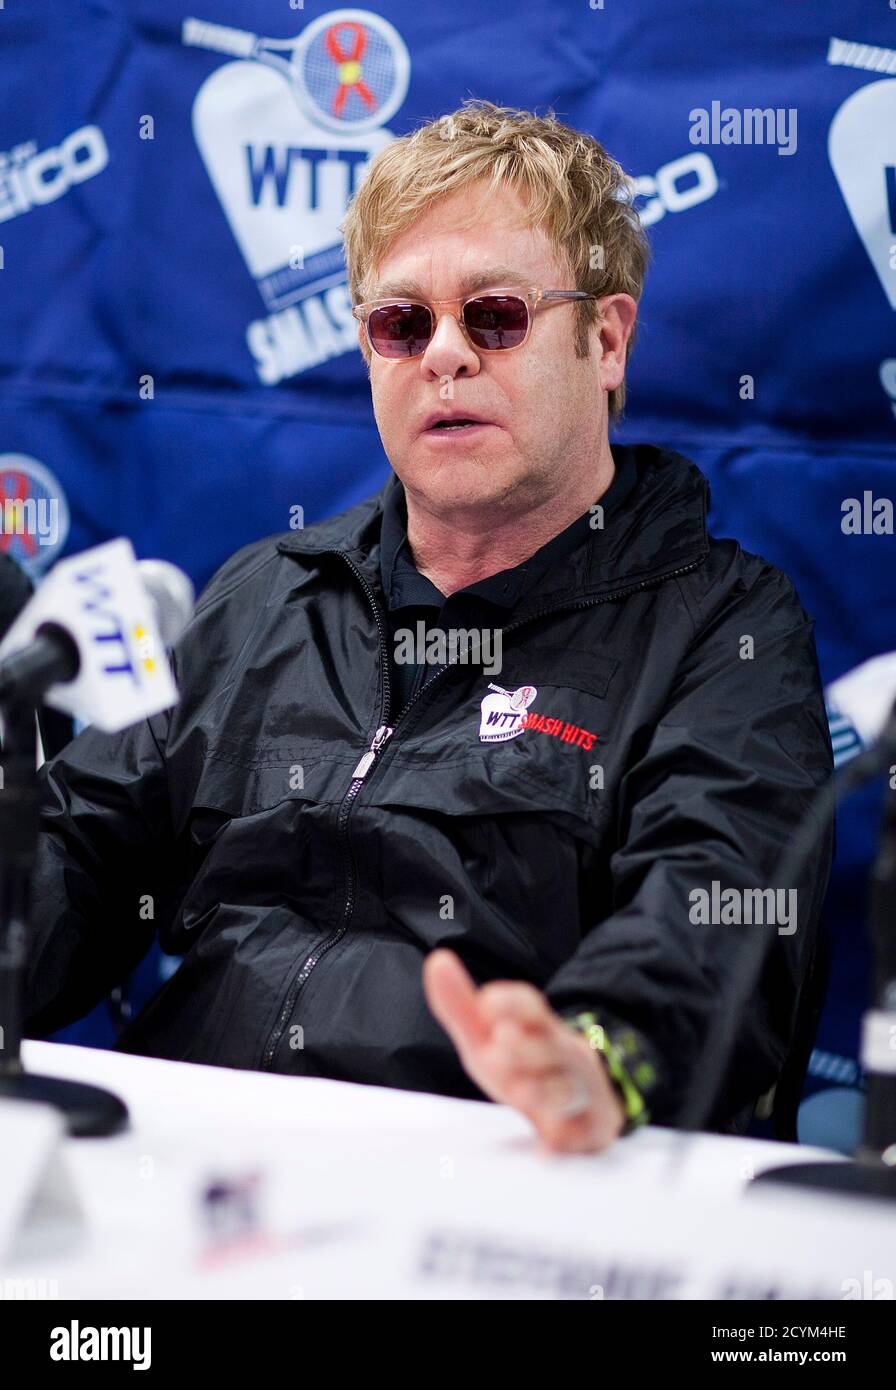 Sir Elton John speaks at a news conference for the World Team Tennis Smash Hits fundraiser in Washington November 15, 2010. The event will raise money for the Elton John AIDS Foundation and local Washington, D.C. Area AIDS charities, according to the World Team Tennis website. REUTERS/Joshua Roberts    (UNITED STATES - Tags: SPORT TENNIS ENTERTAINMENT) Stock Photo